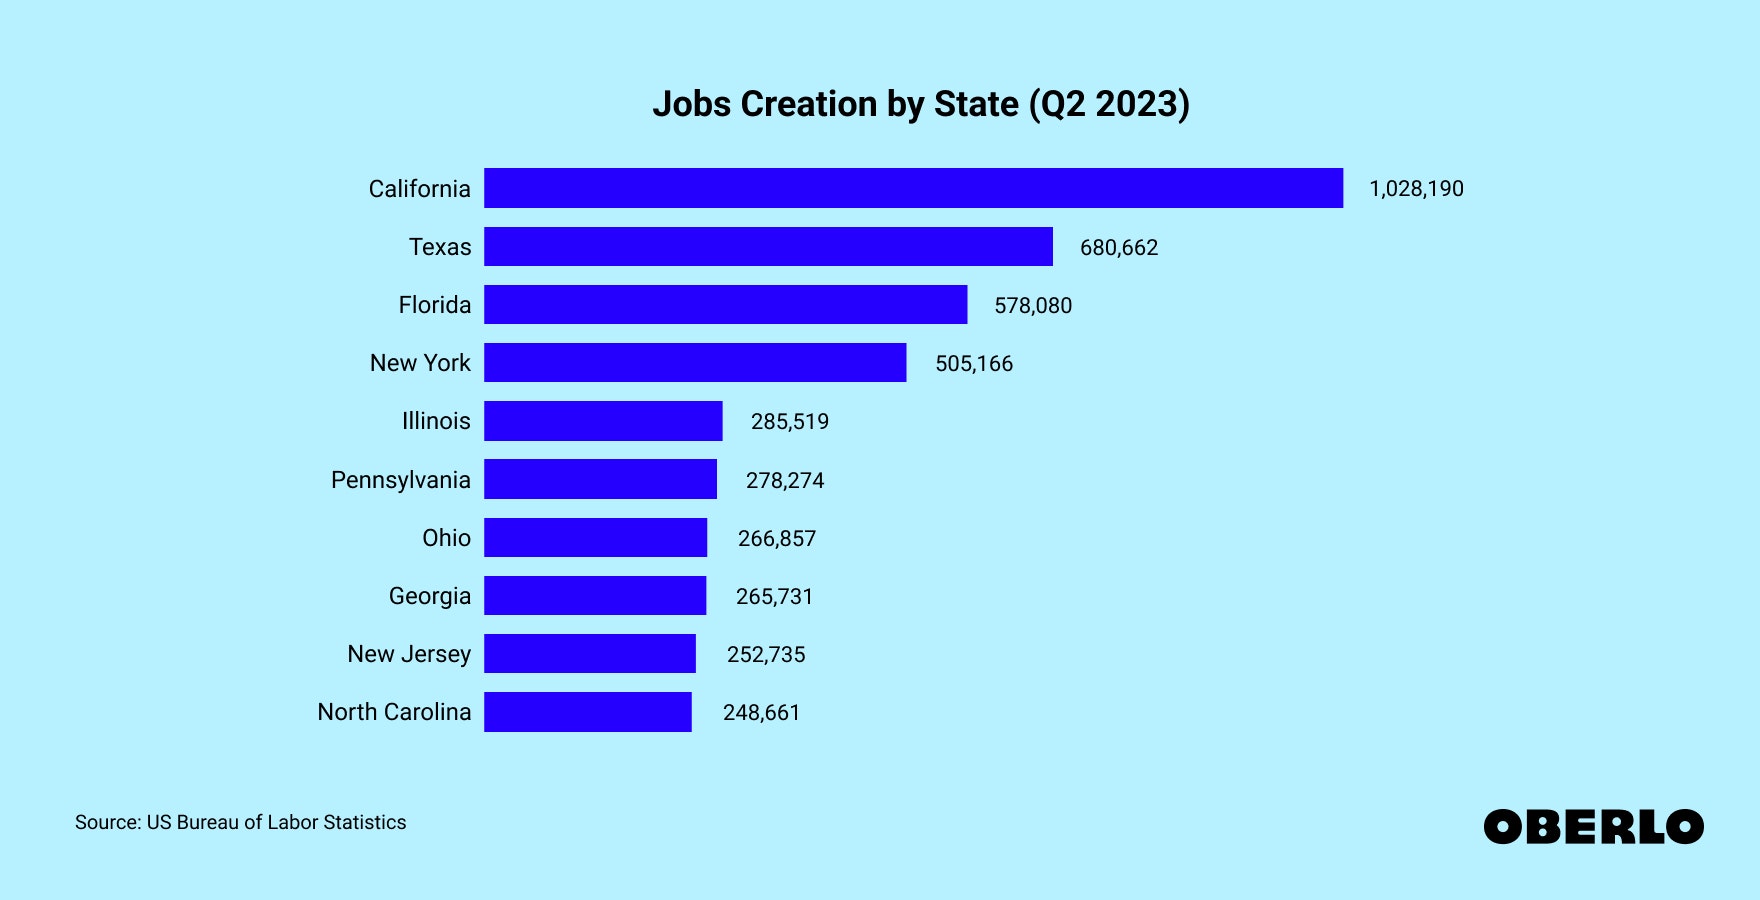 Chart showing: Jobs creation by state (Q2 2023): top 10